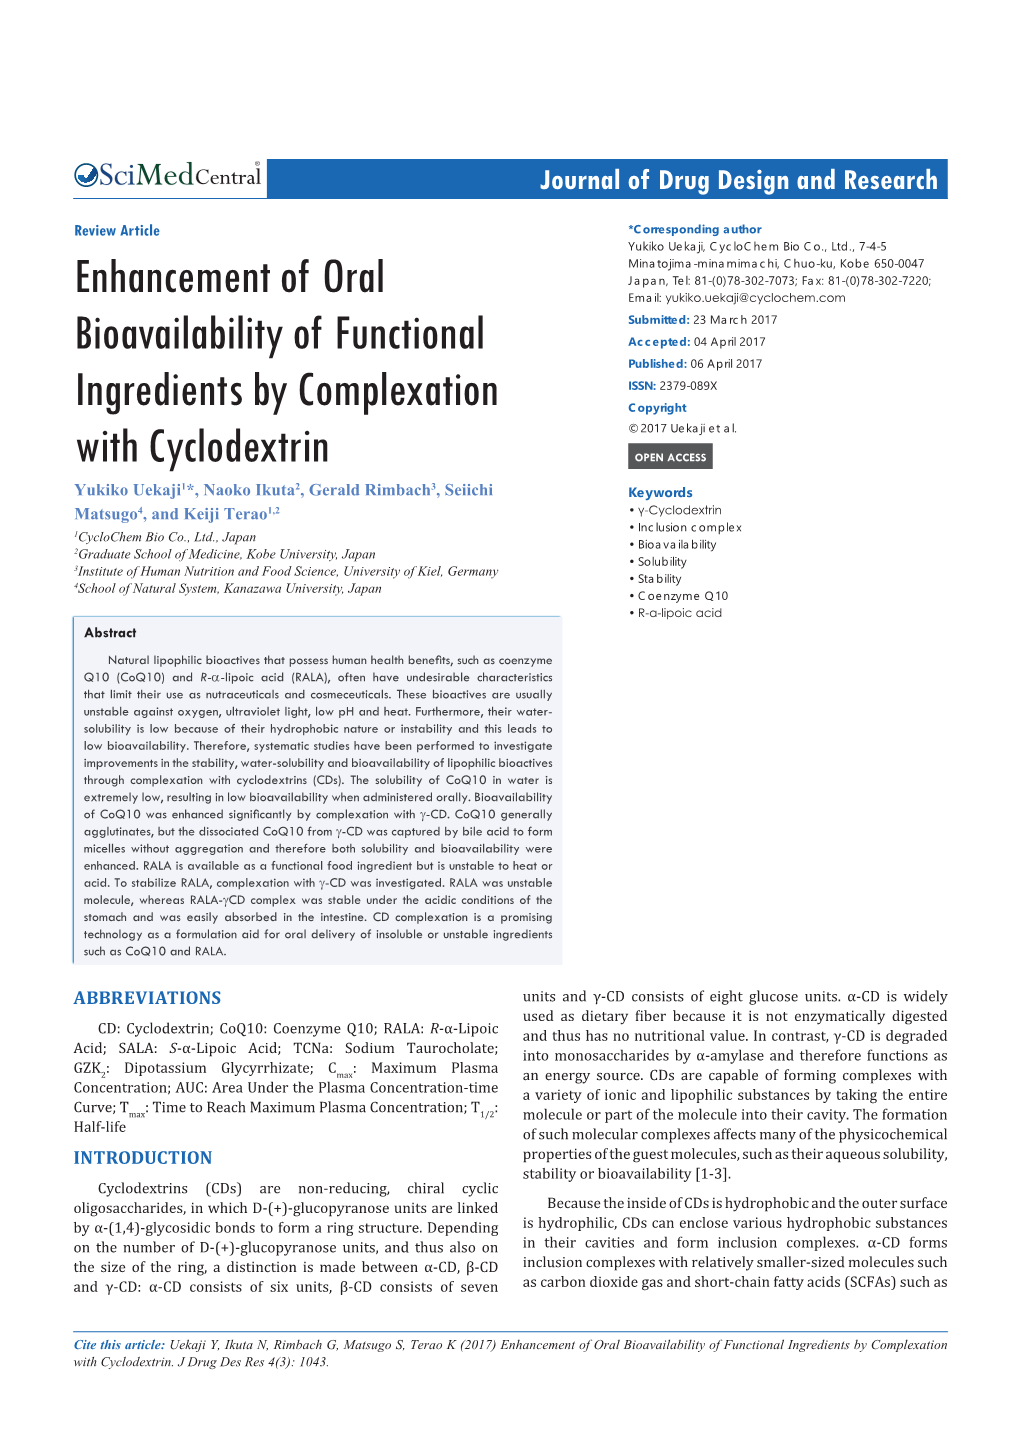 Enhancement of Oral Bioavailability of Functional Ingredients by Complexation with Cyclodextrin